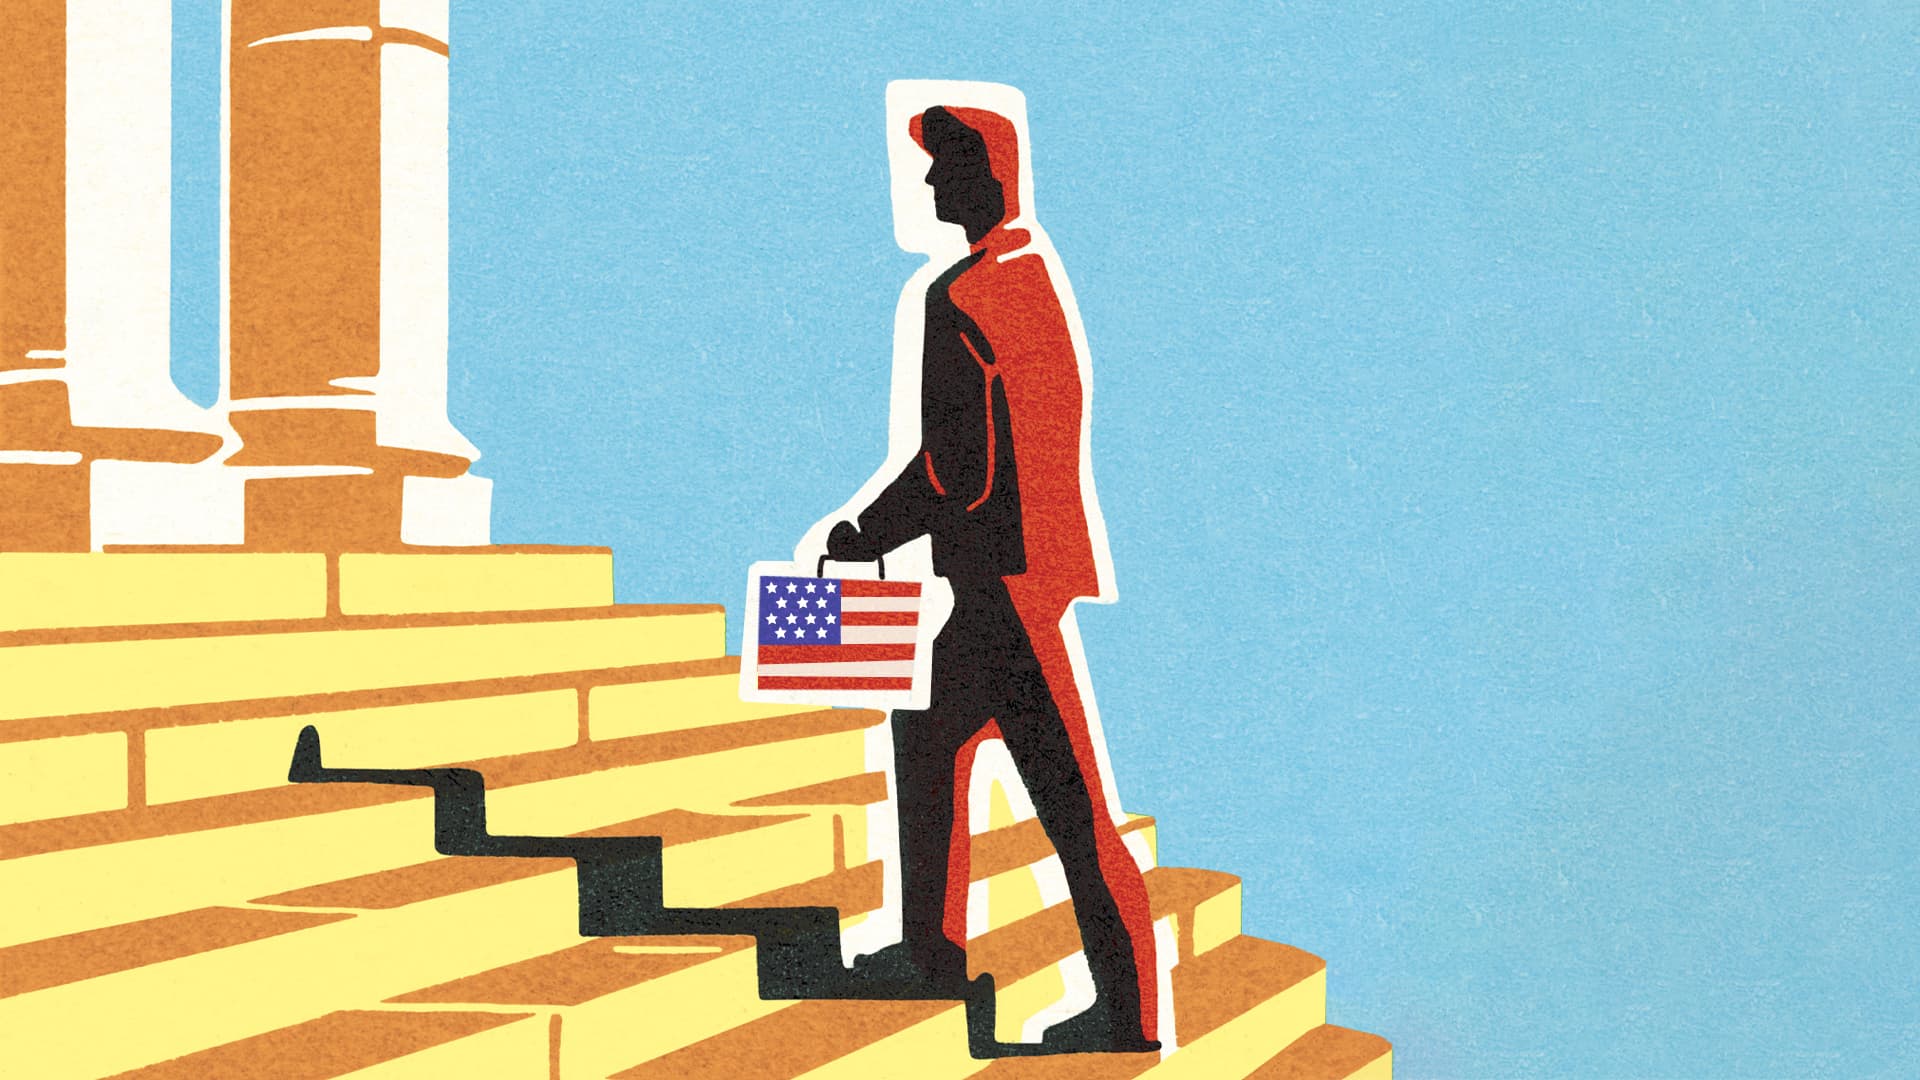 A man walks up steps carrying a box with the American flag on it